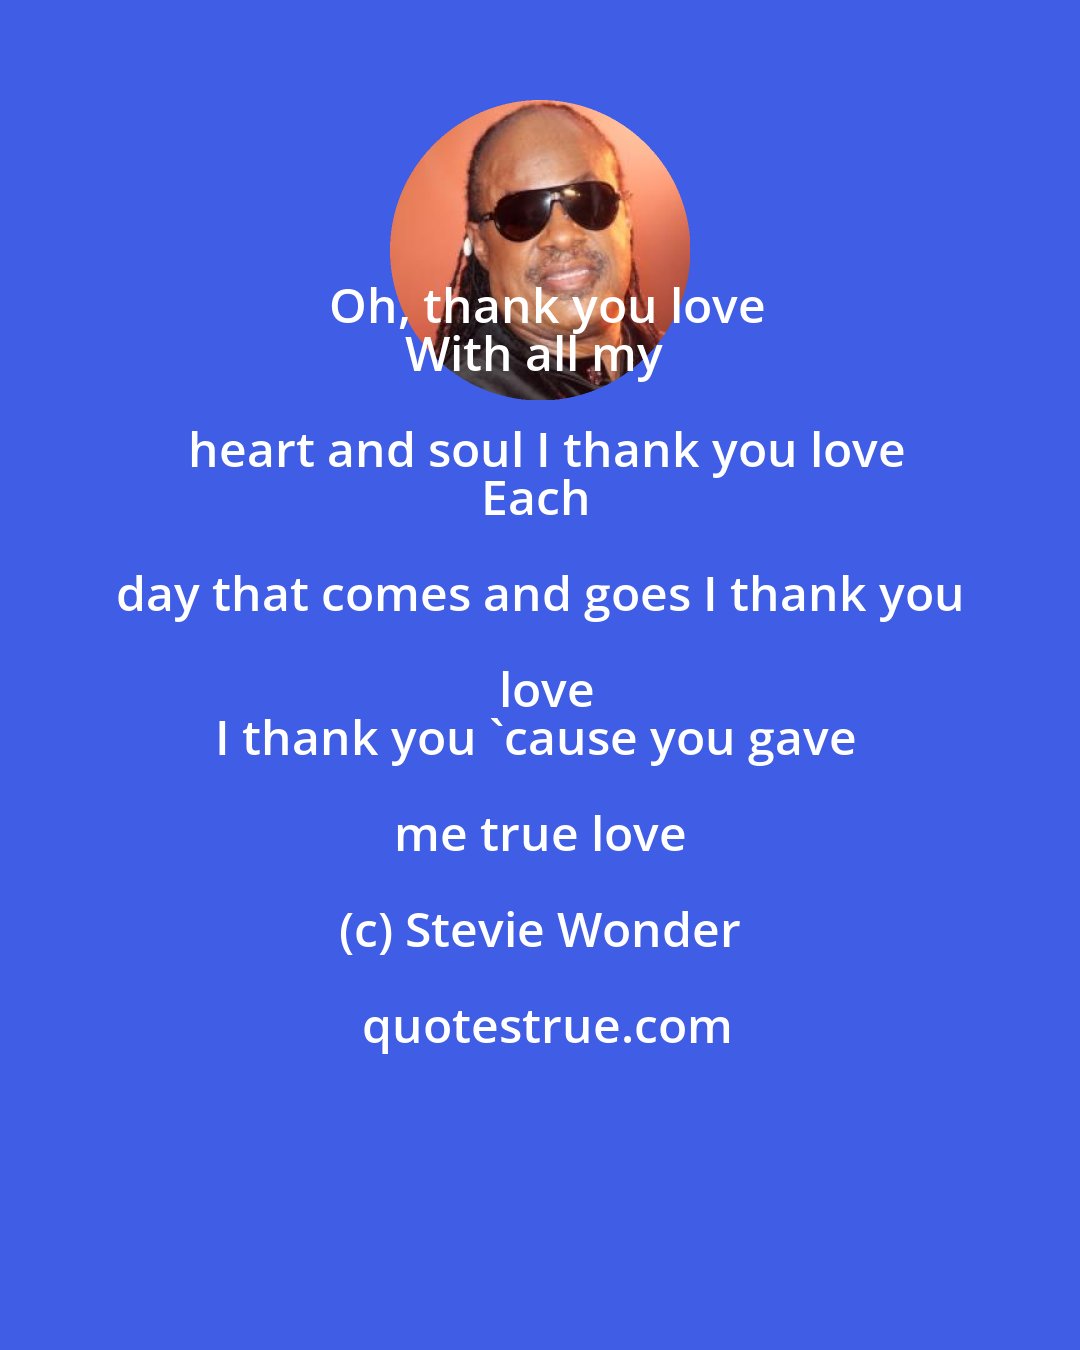 Stevie Wonder: Oh, thank you love
With all my heart and soul I thank you love
Each day that comes and goes I thank you love
I thank you 'cause you gave me true love